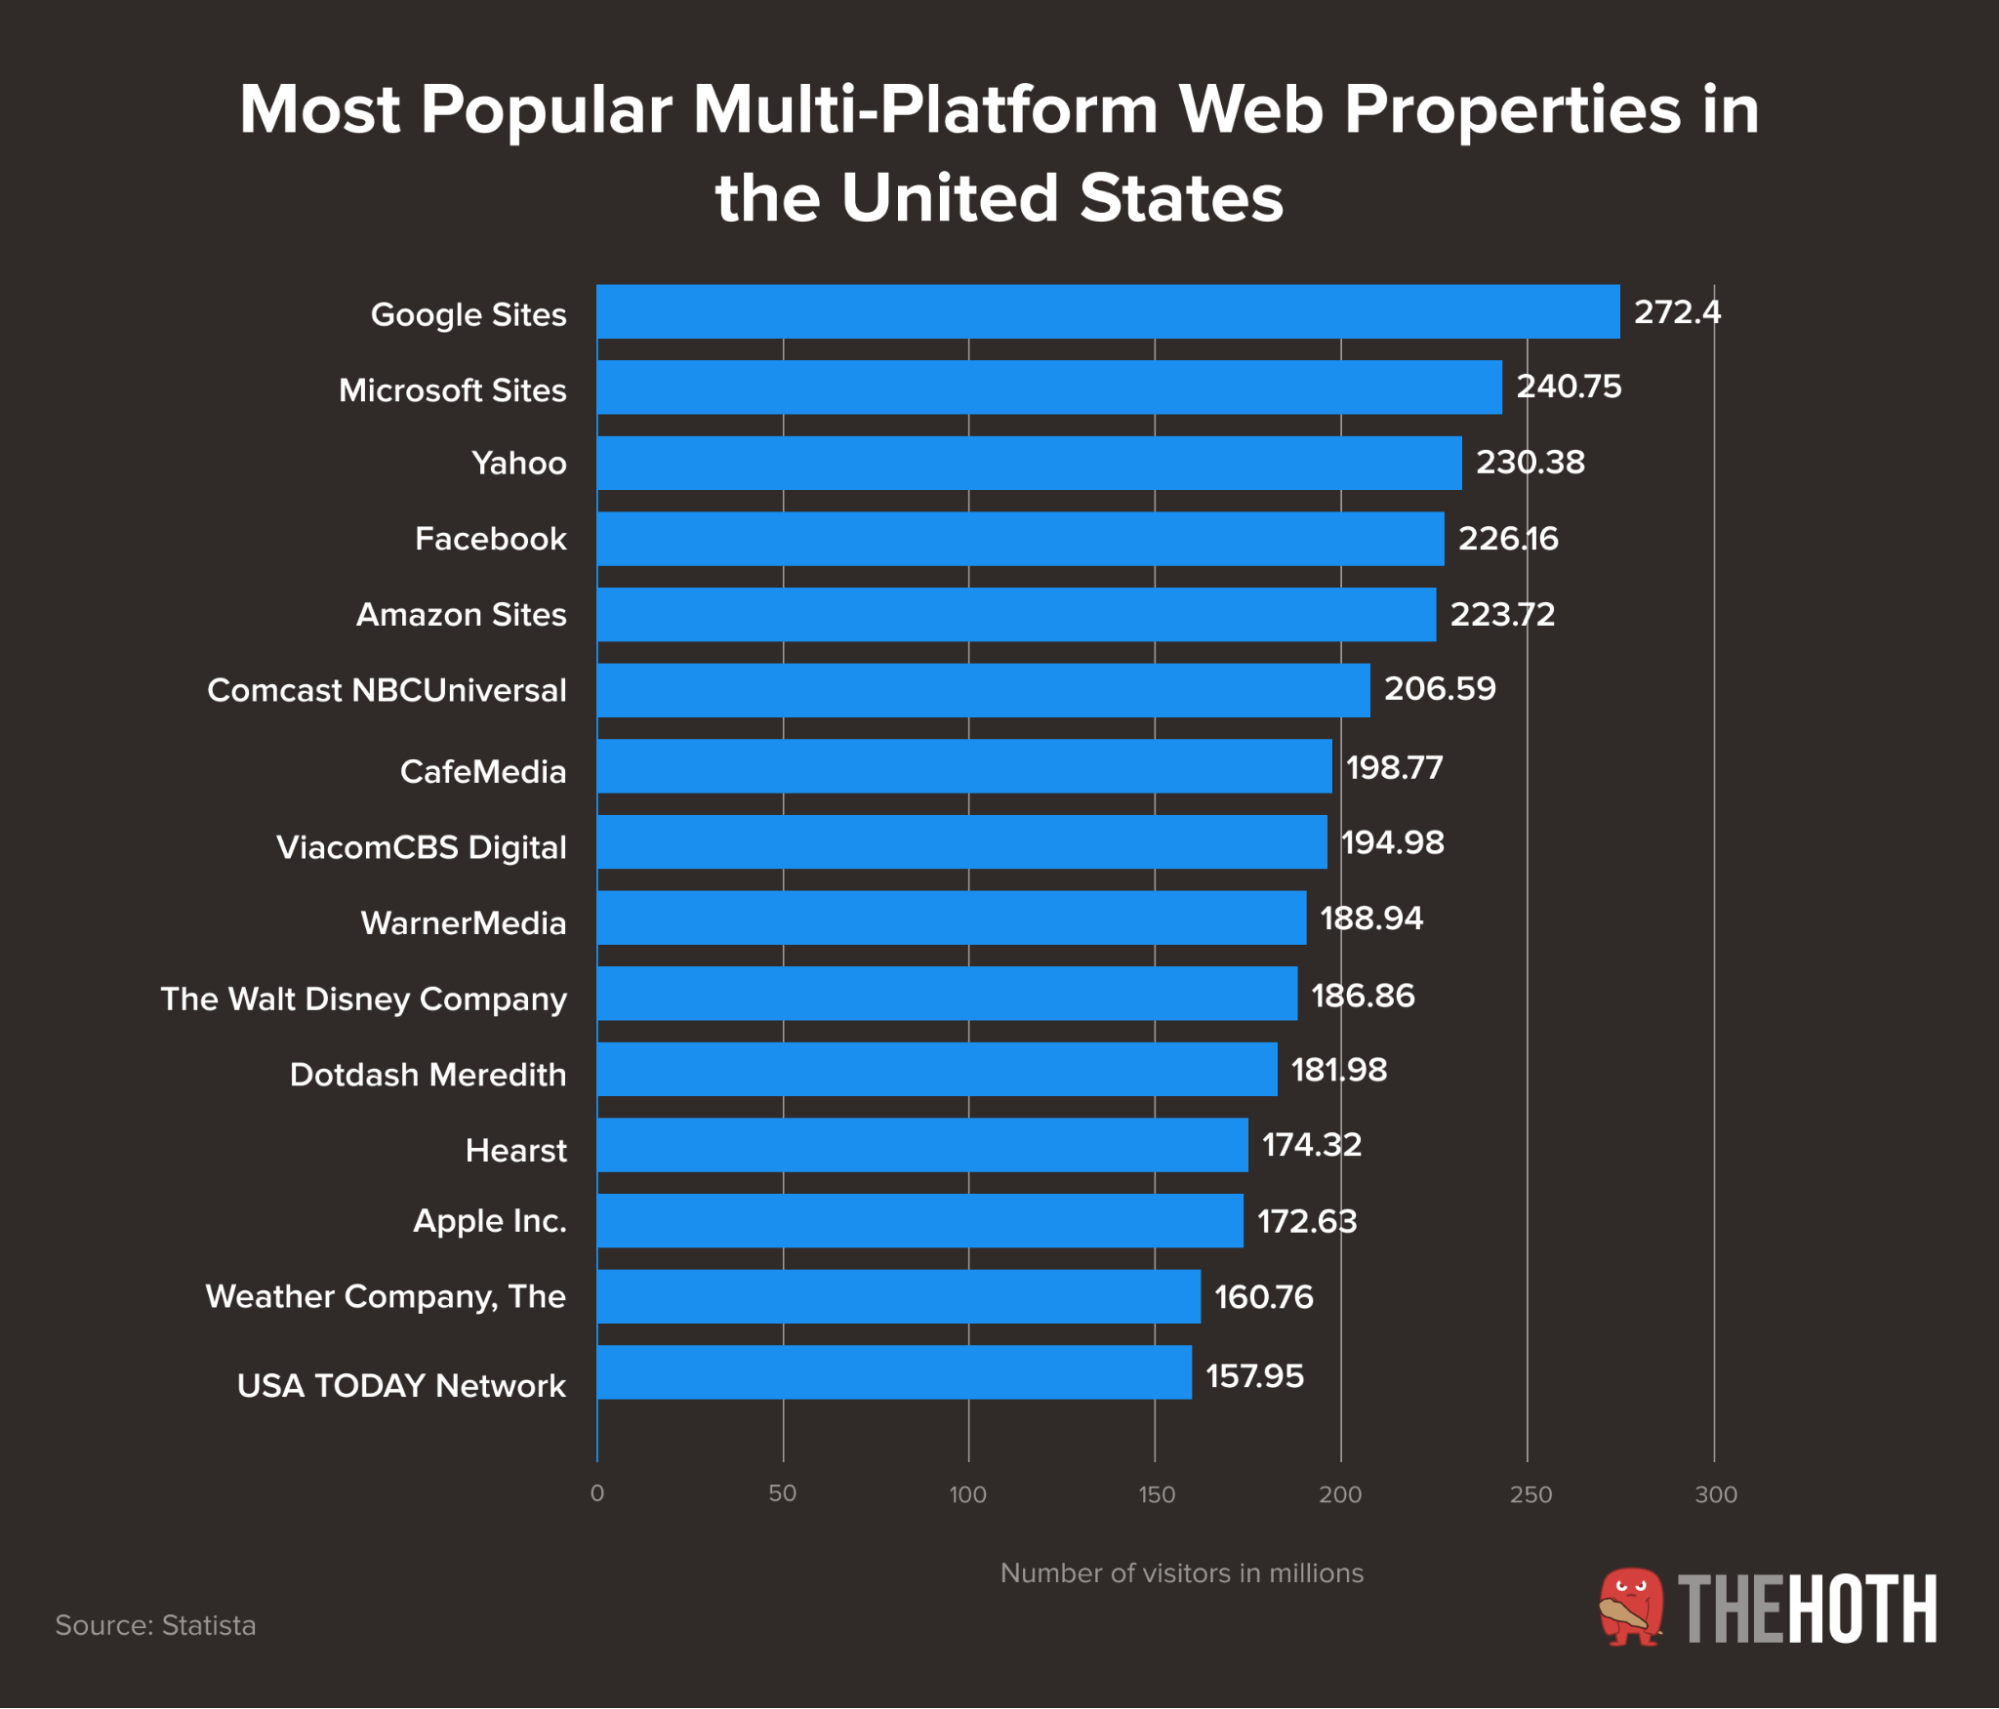 Google is the most popular web property